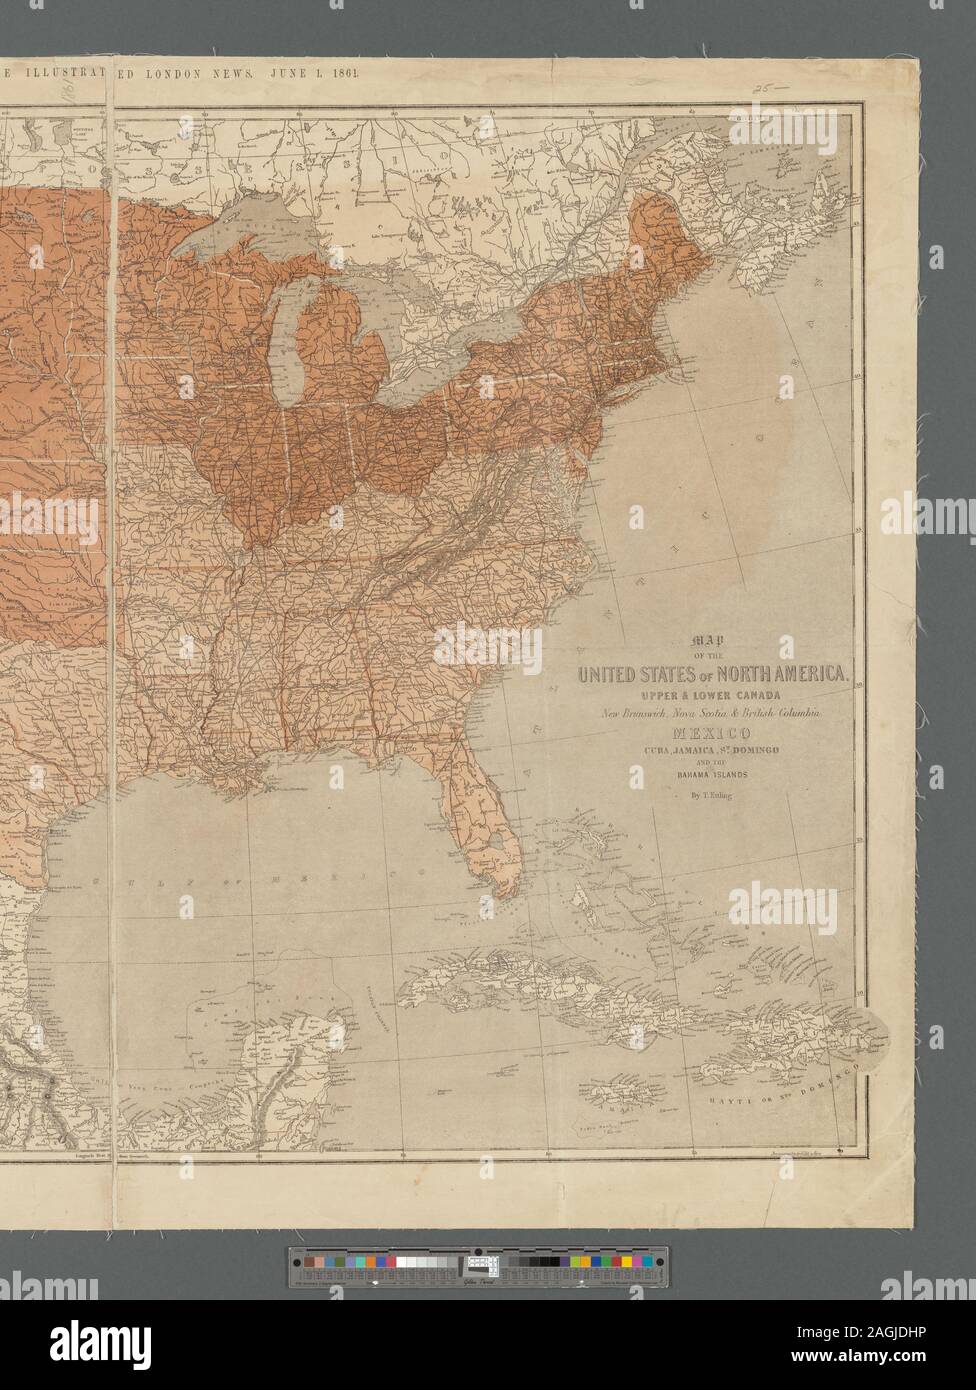 Relief shown by hachures. At top of map: Supplement to the Illustrated London News, June 1, 1861. General map showing state and international boundaries, railroads, cities, rivers, and relief by hachures. Two colors are used to differentiate between Union and Confederate states. Includes inset covering southern Mexico. Mapping the Nation (NEH grant, 2015-2018); Map of the United States of North America, Upper & Lower Canada, New Brunswick, Nova Scotia & British Columbia. Mexico, Cuba, Jamaica, St. Domingo and the Bahama Islands Stock Photo